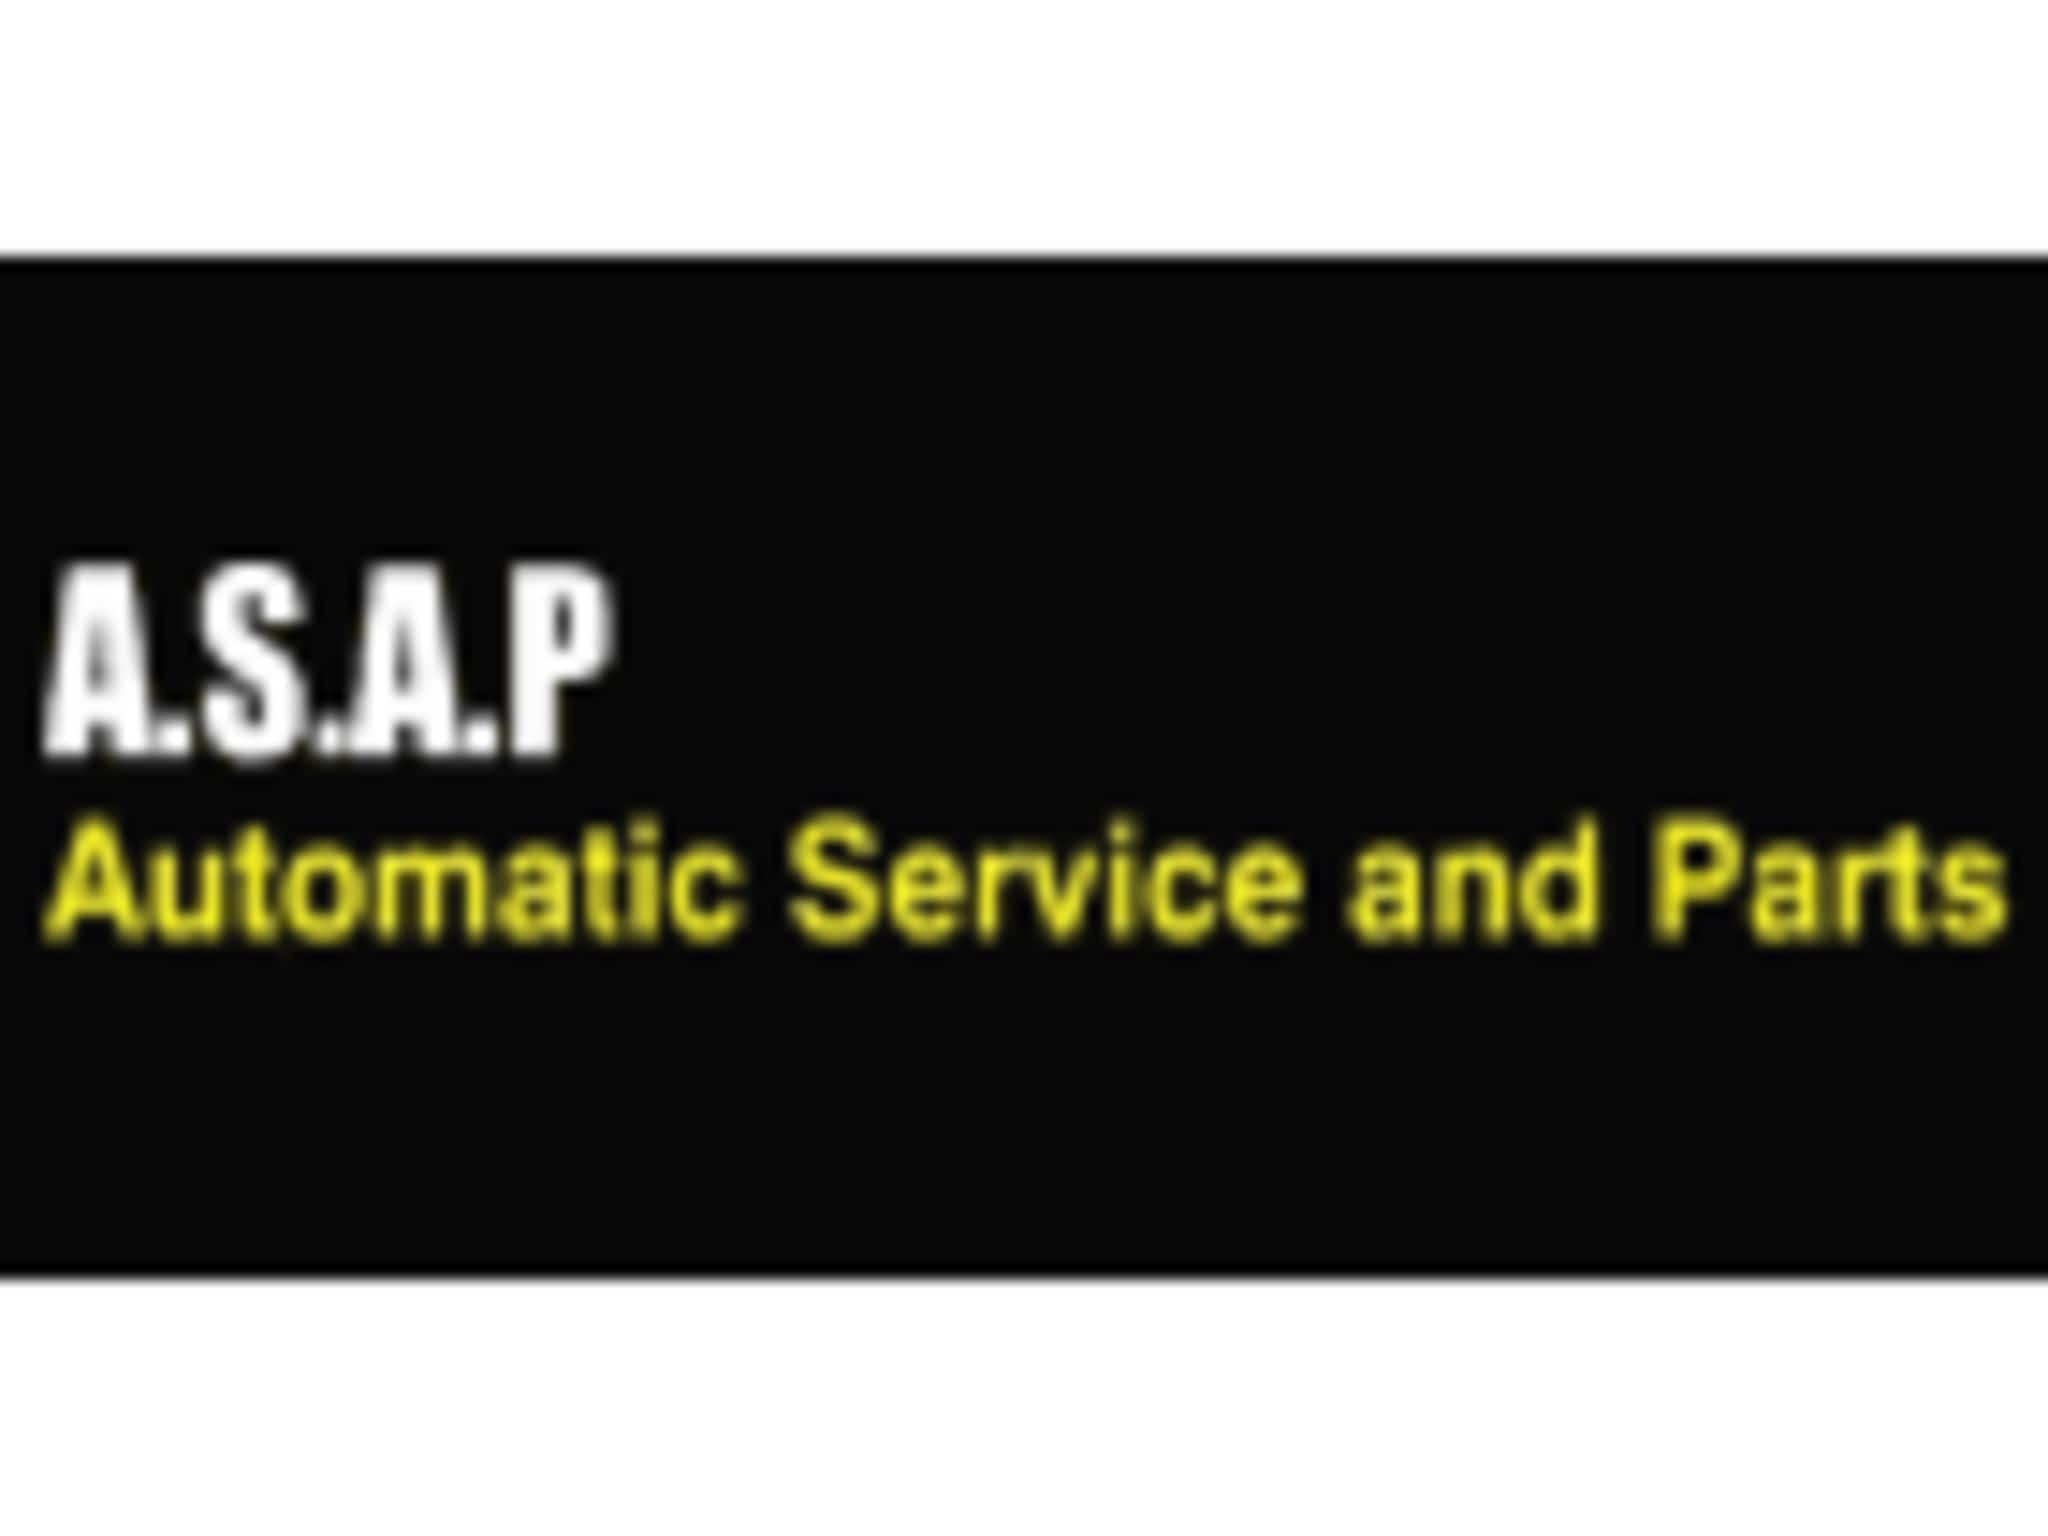 photo ASAP Automatic Service and Parts